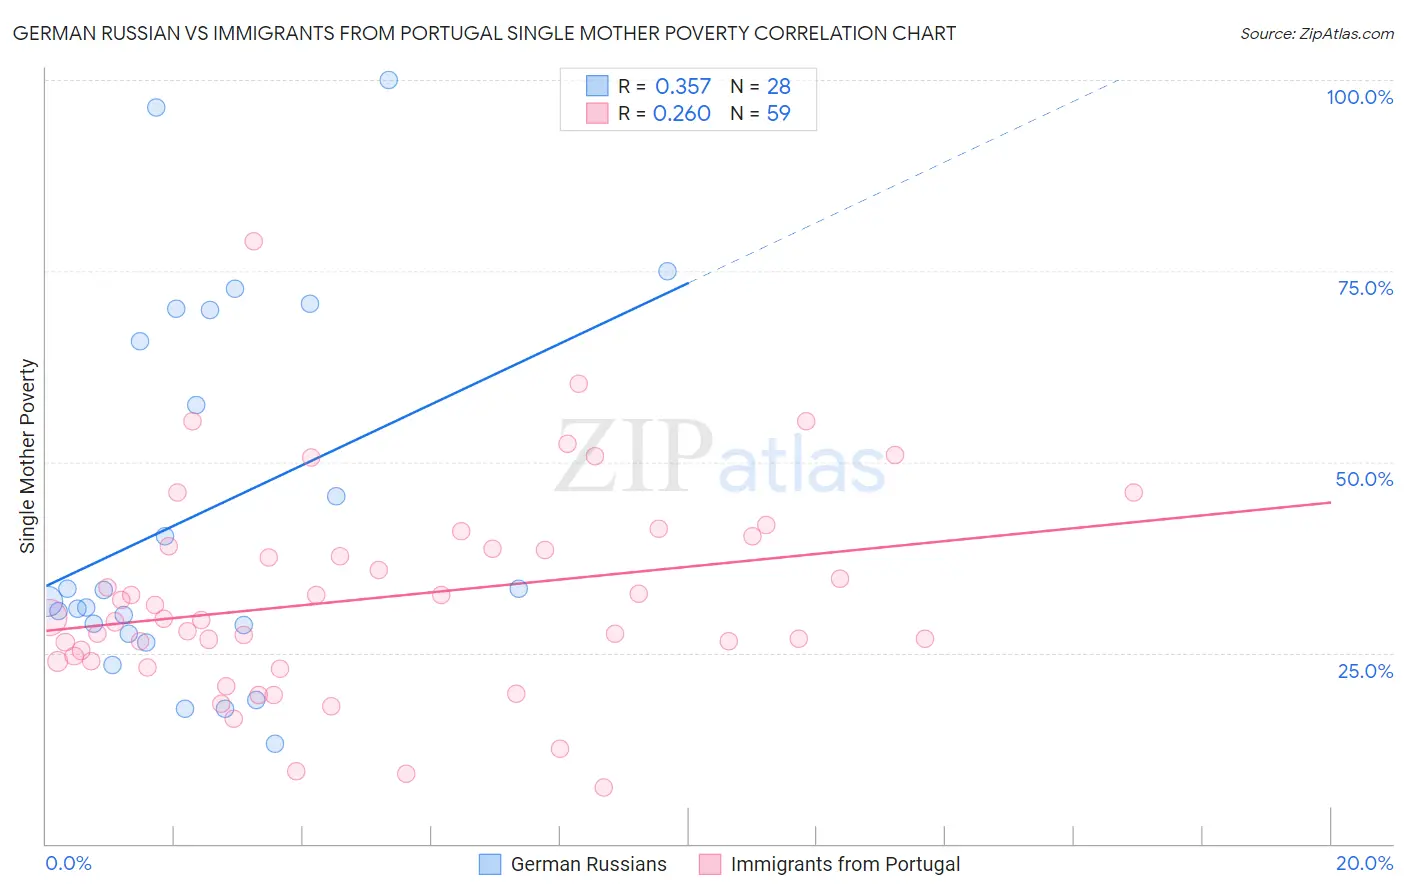 German Russian vs Immigrants from Portugal Single Mother Poverty